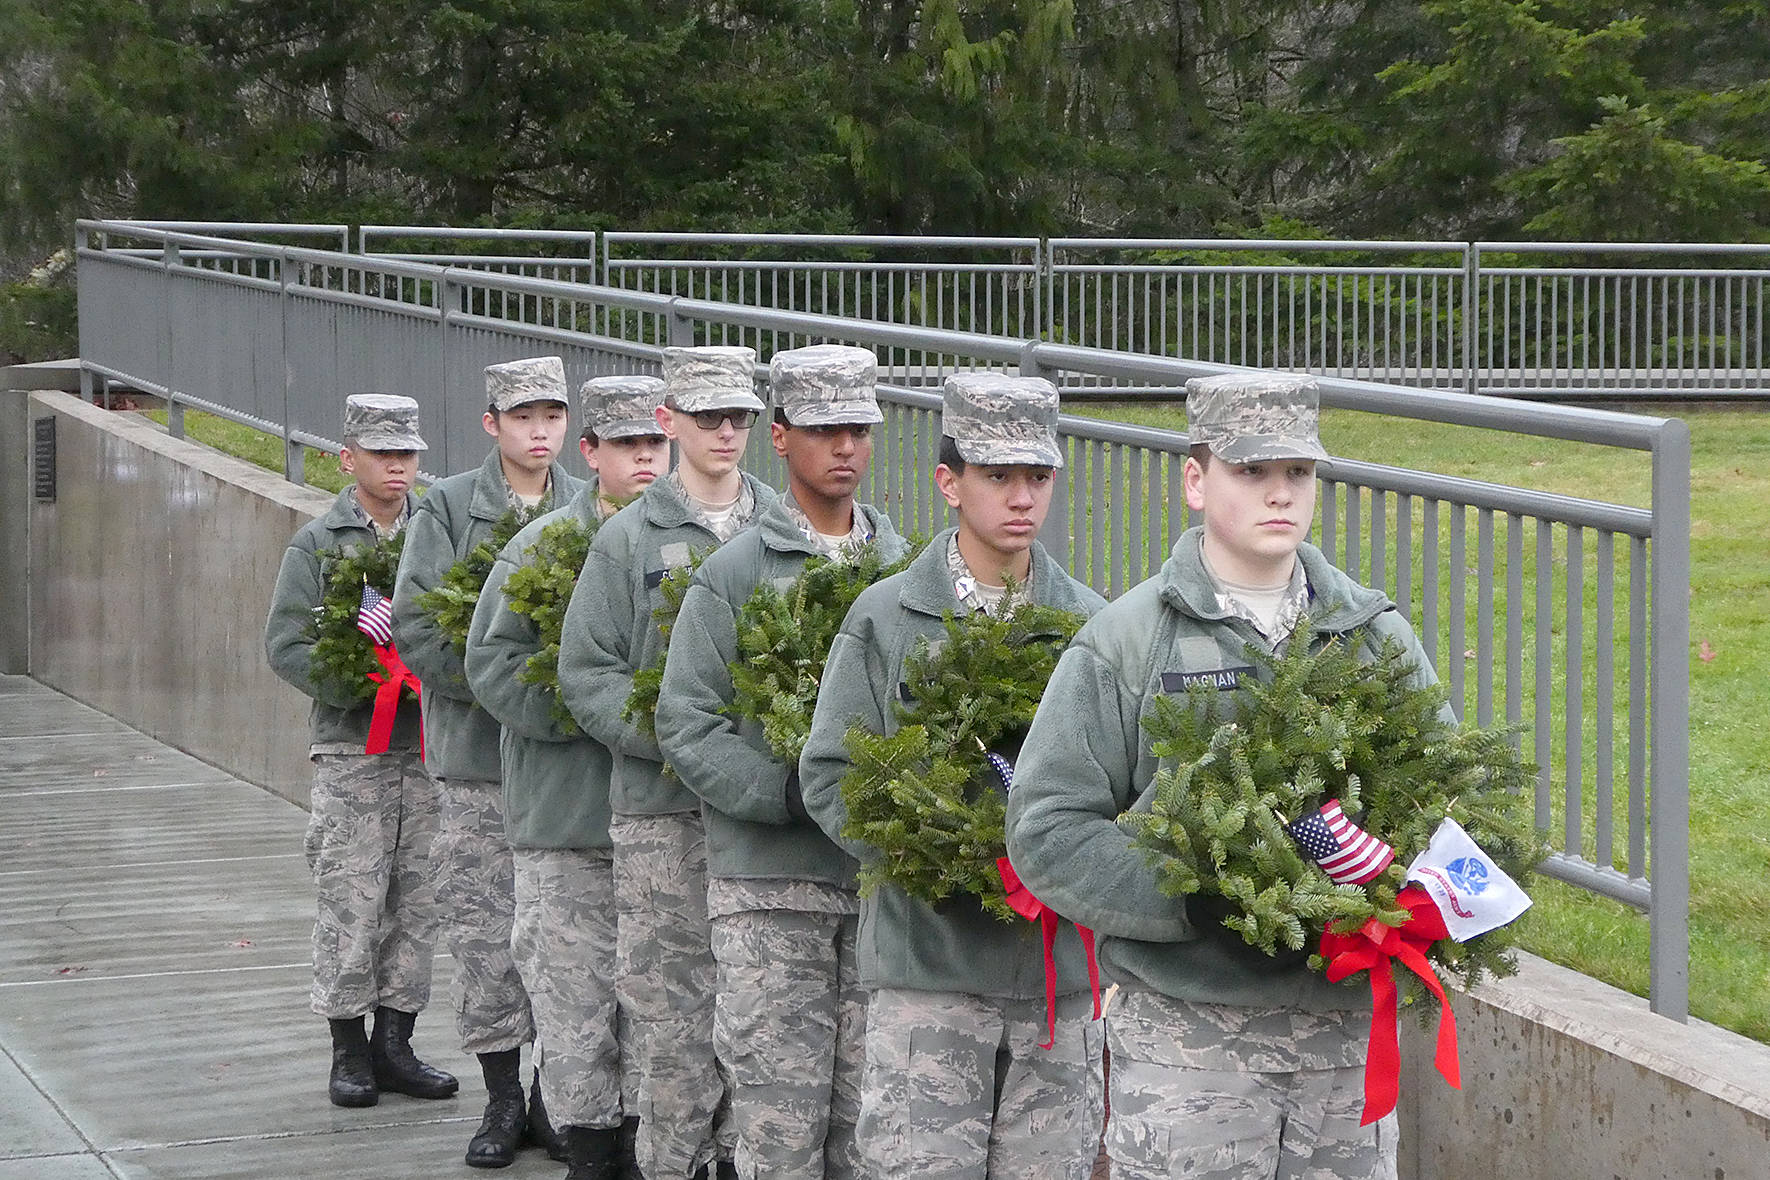 Wreaths decorate graves of fallen soldiers